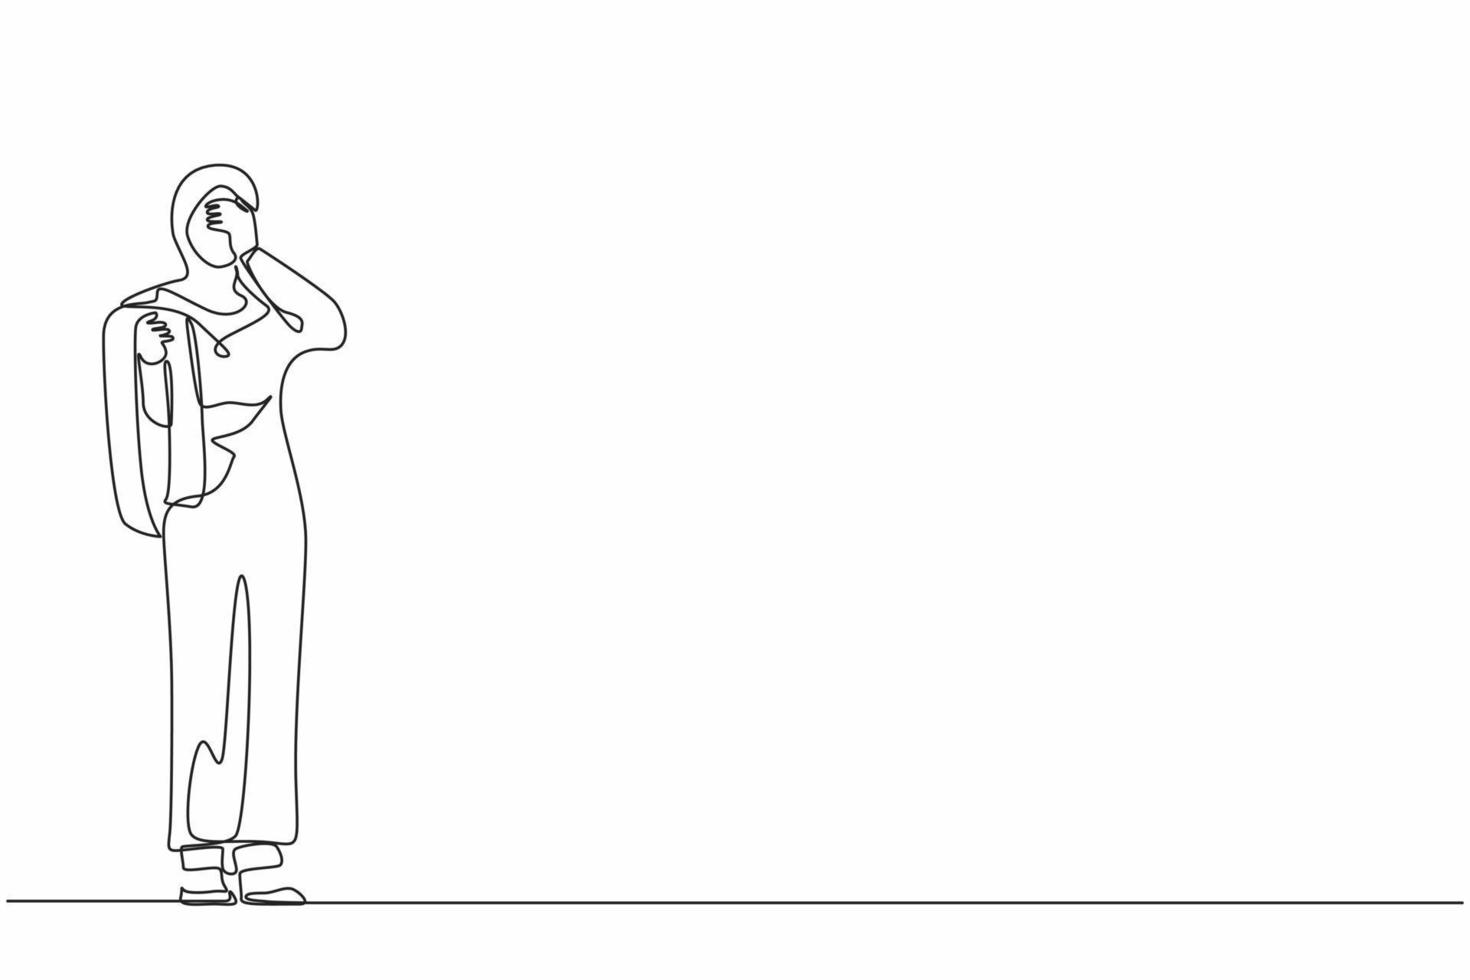 Single one line drawing financial problems bankruptcy concept. Sad depressed Arab businesswoman standing thinking about finding money for paying bills during crisis. Continuous line draw design vector